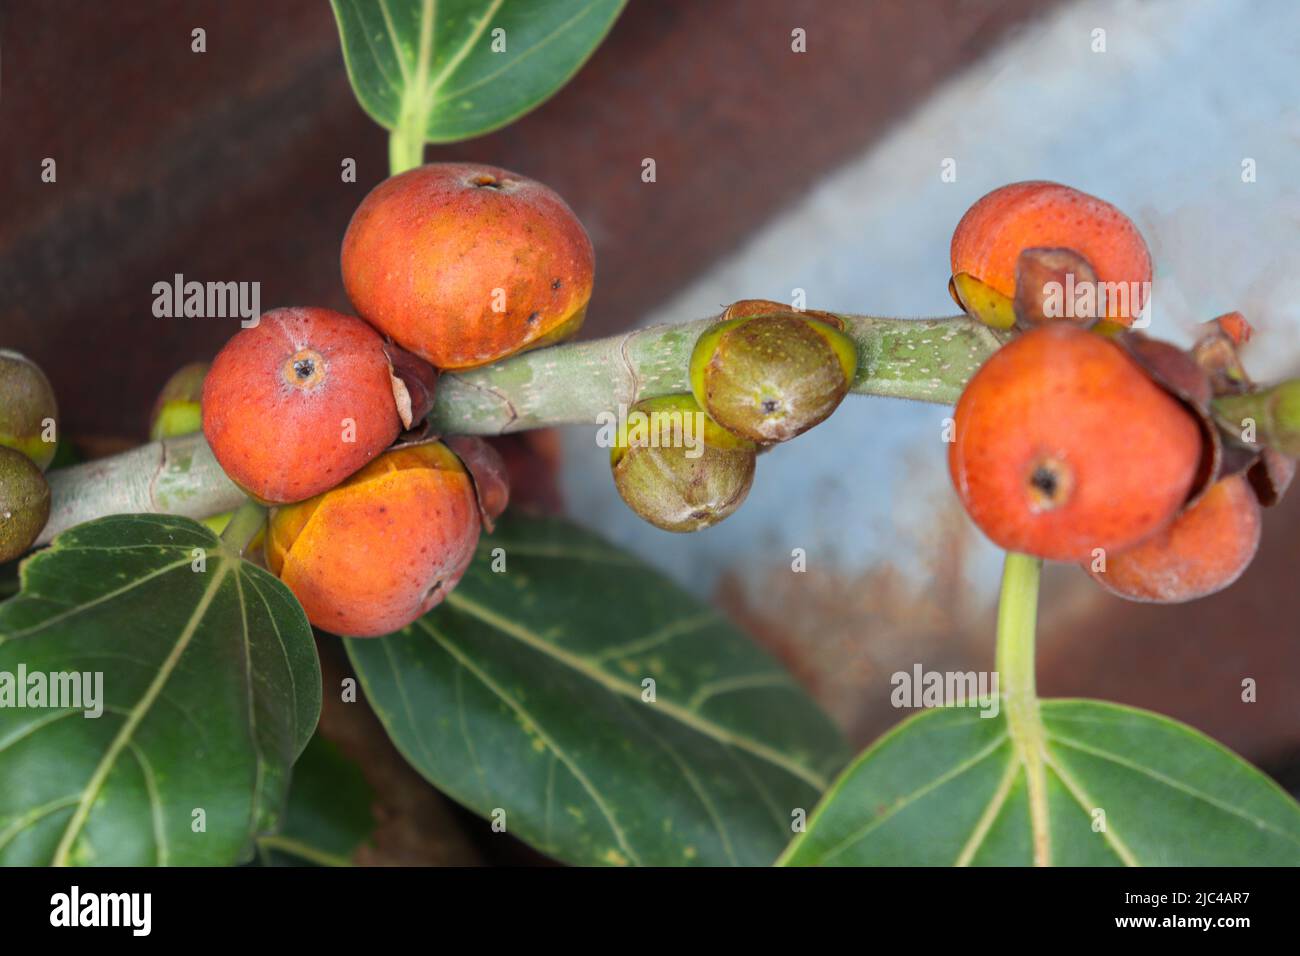 red colored banyan fruit on tree in garden for animal food Stock Photo